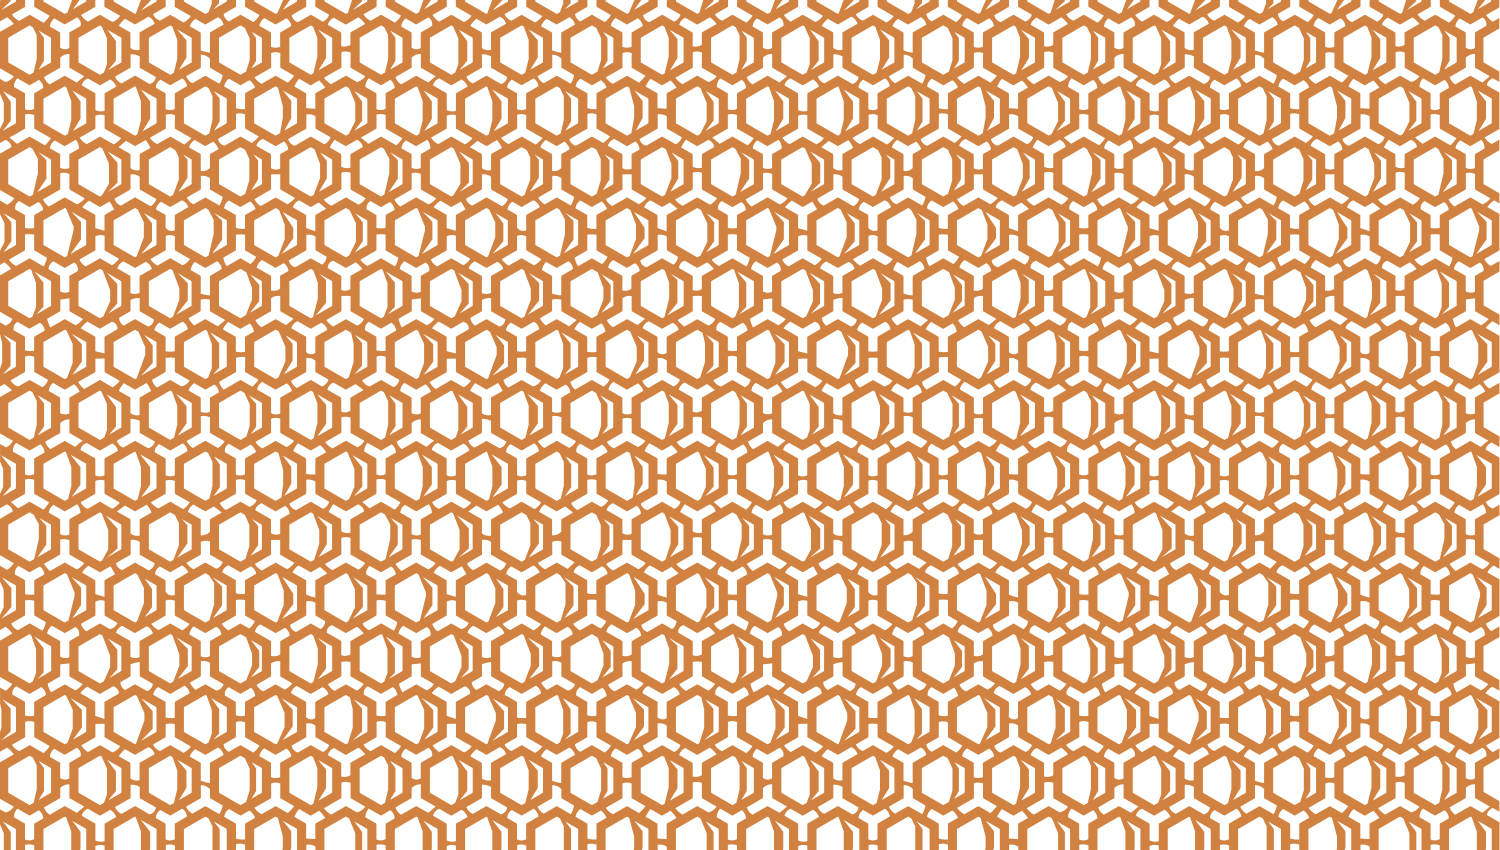 Parasoleil™ Minoan© pattern displayed with a ochre color overlay